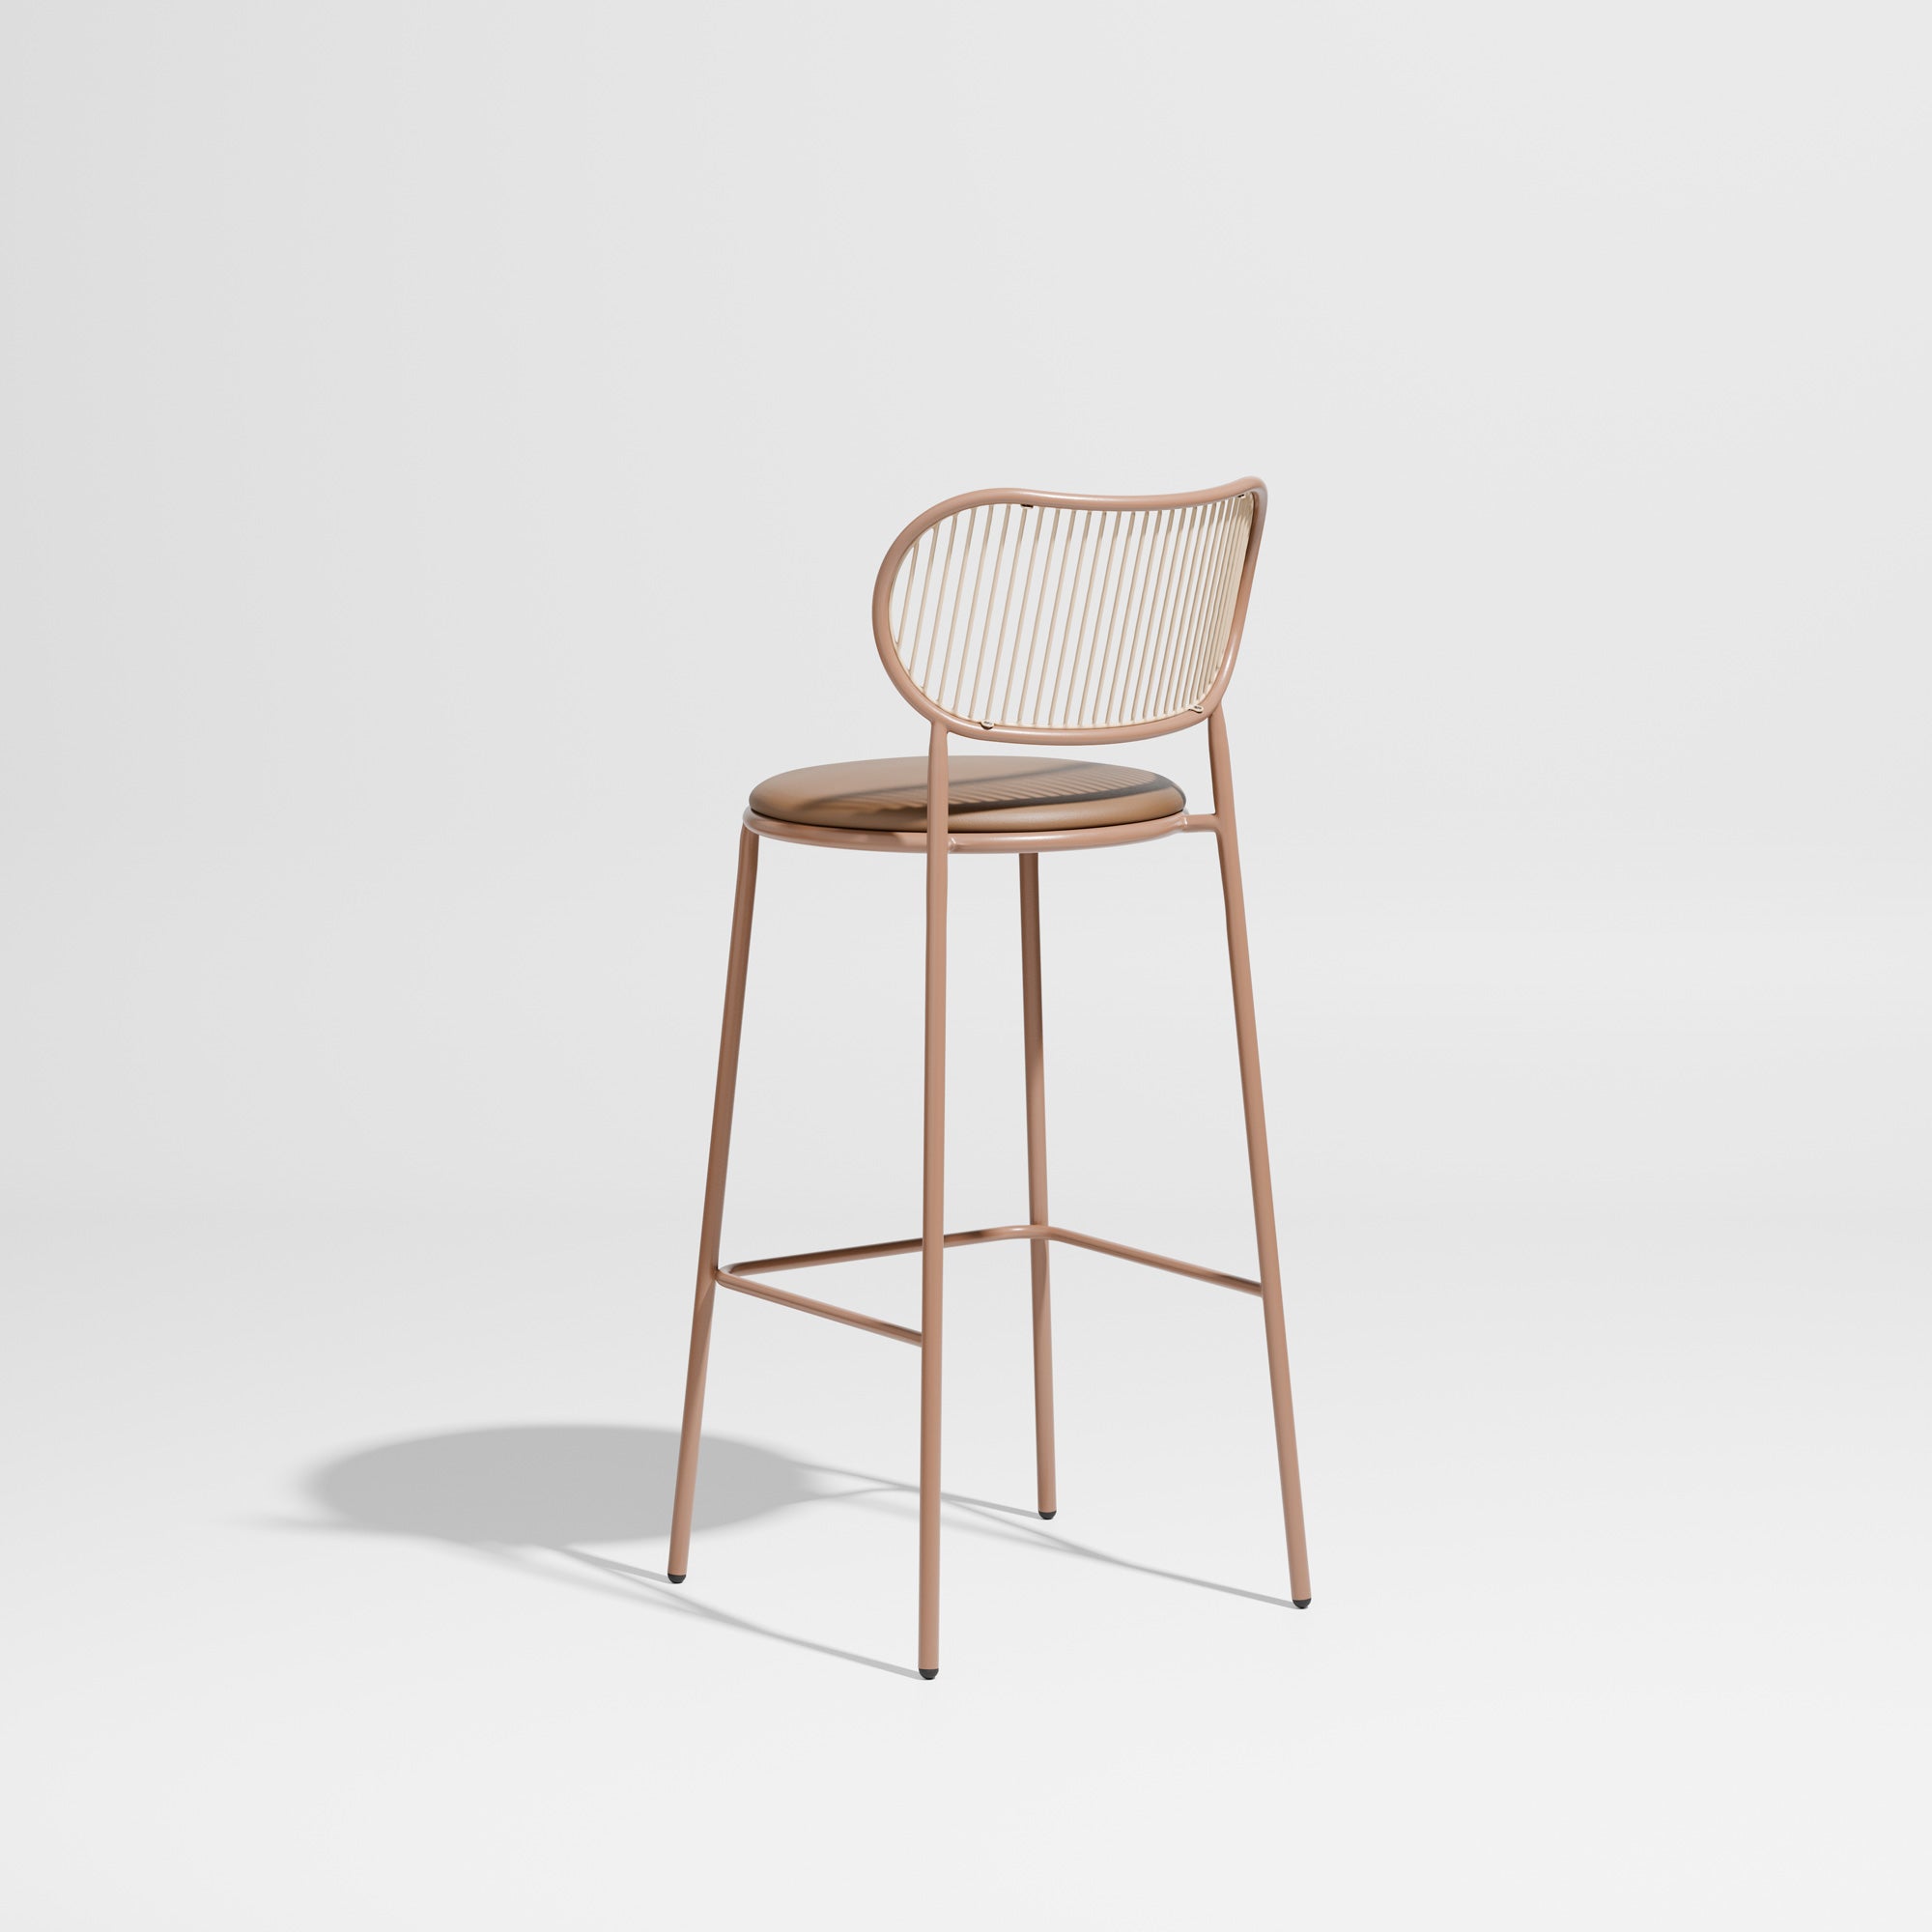 Piper Bar Chair - Upholstered